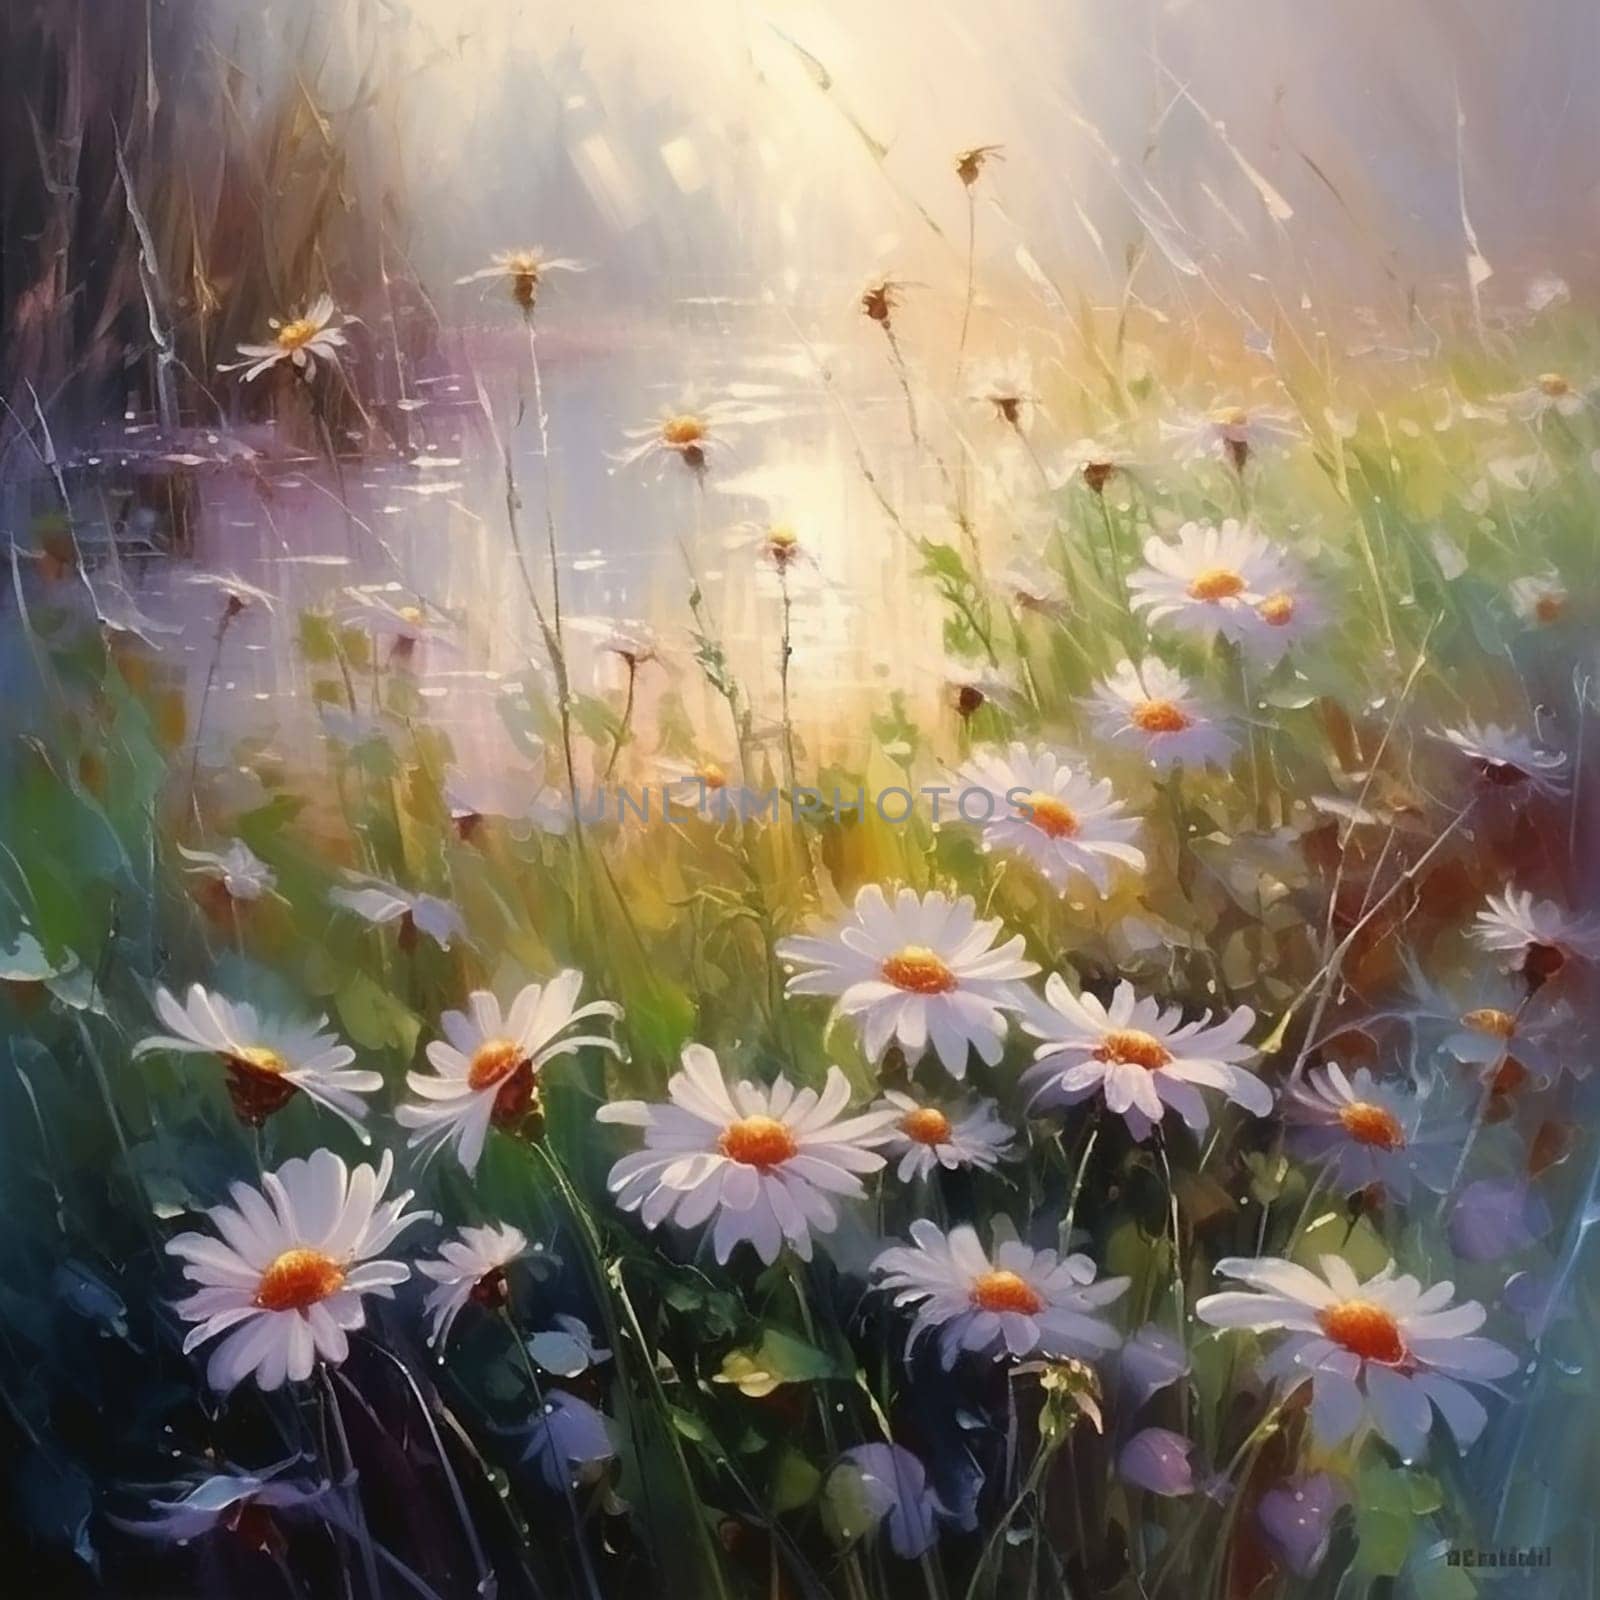 Impressionistic painting of a field with blooming daisies and a hazy background.